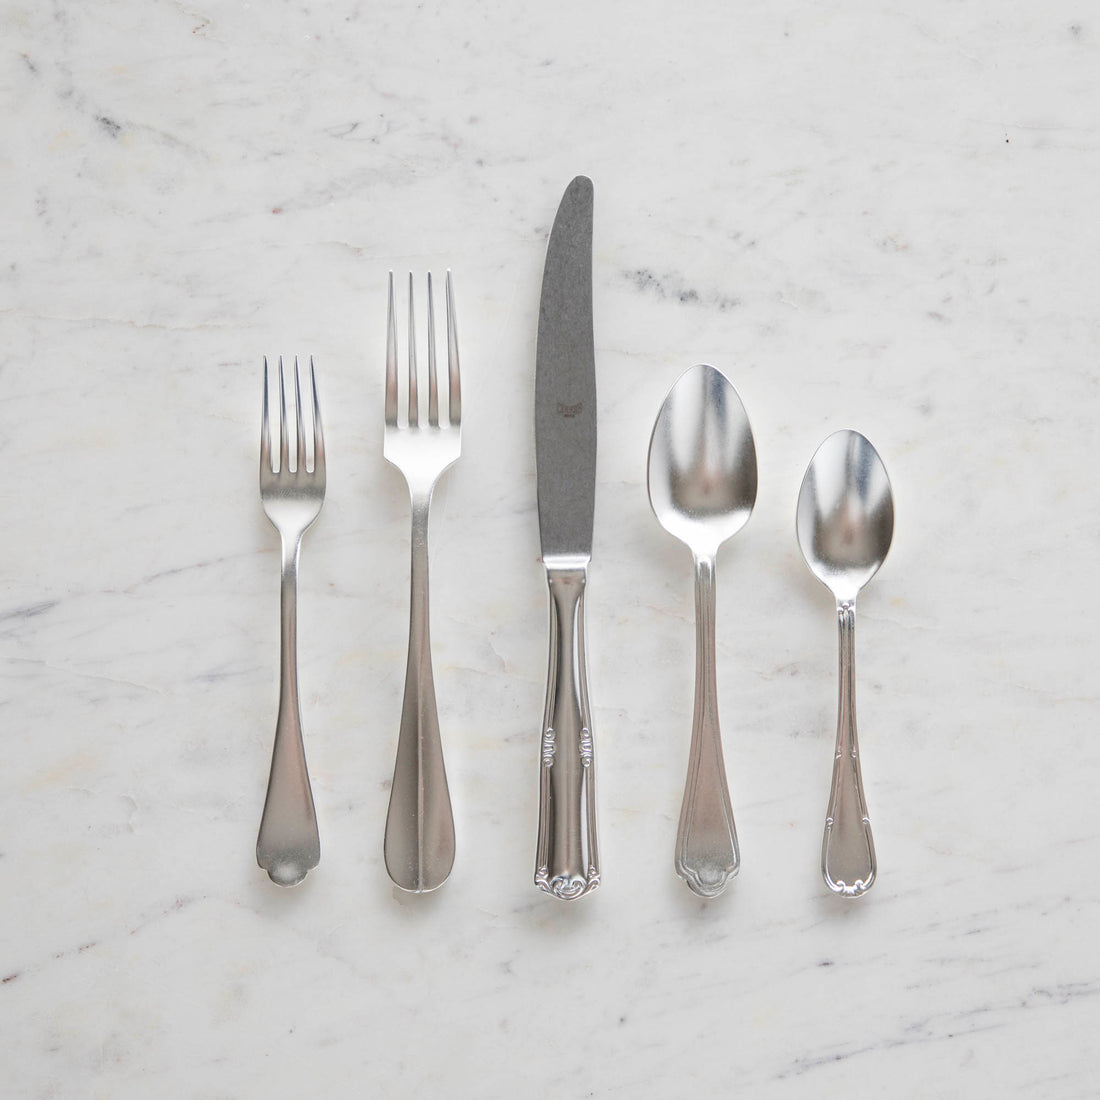 A Mepra Original Vintage 5-Piece Place Setting, including two forks, a knife, and two spoons, arranged on a marble surface.